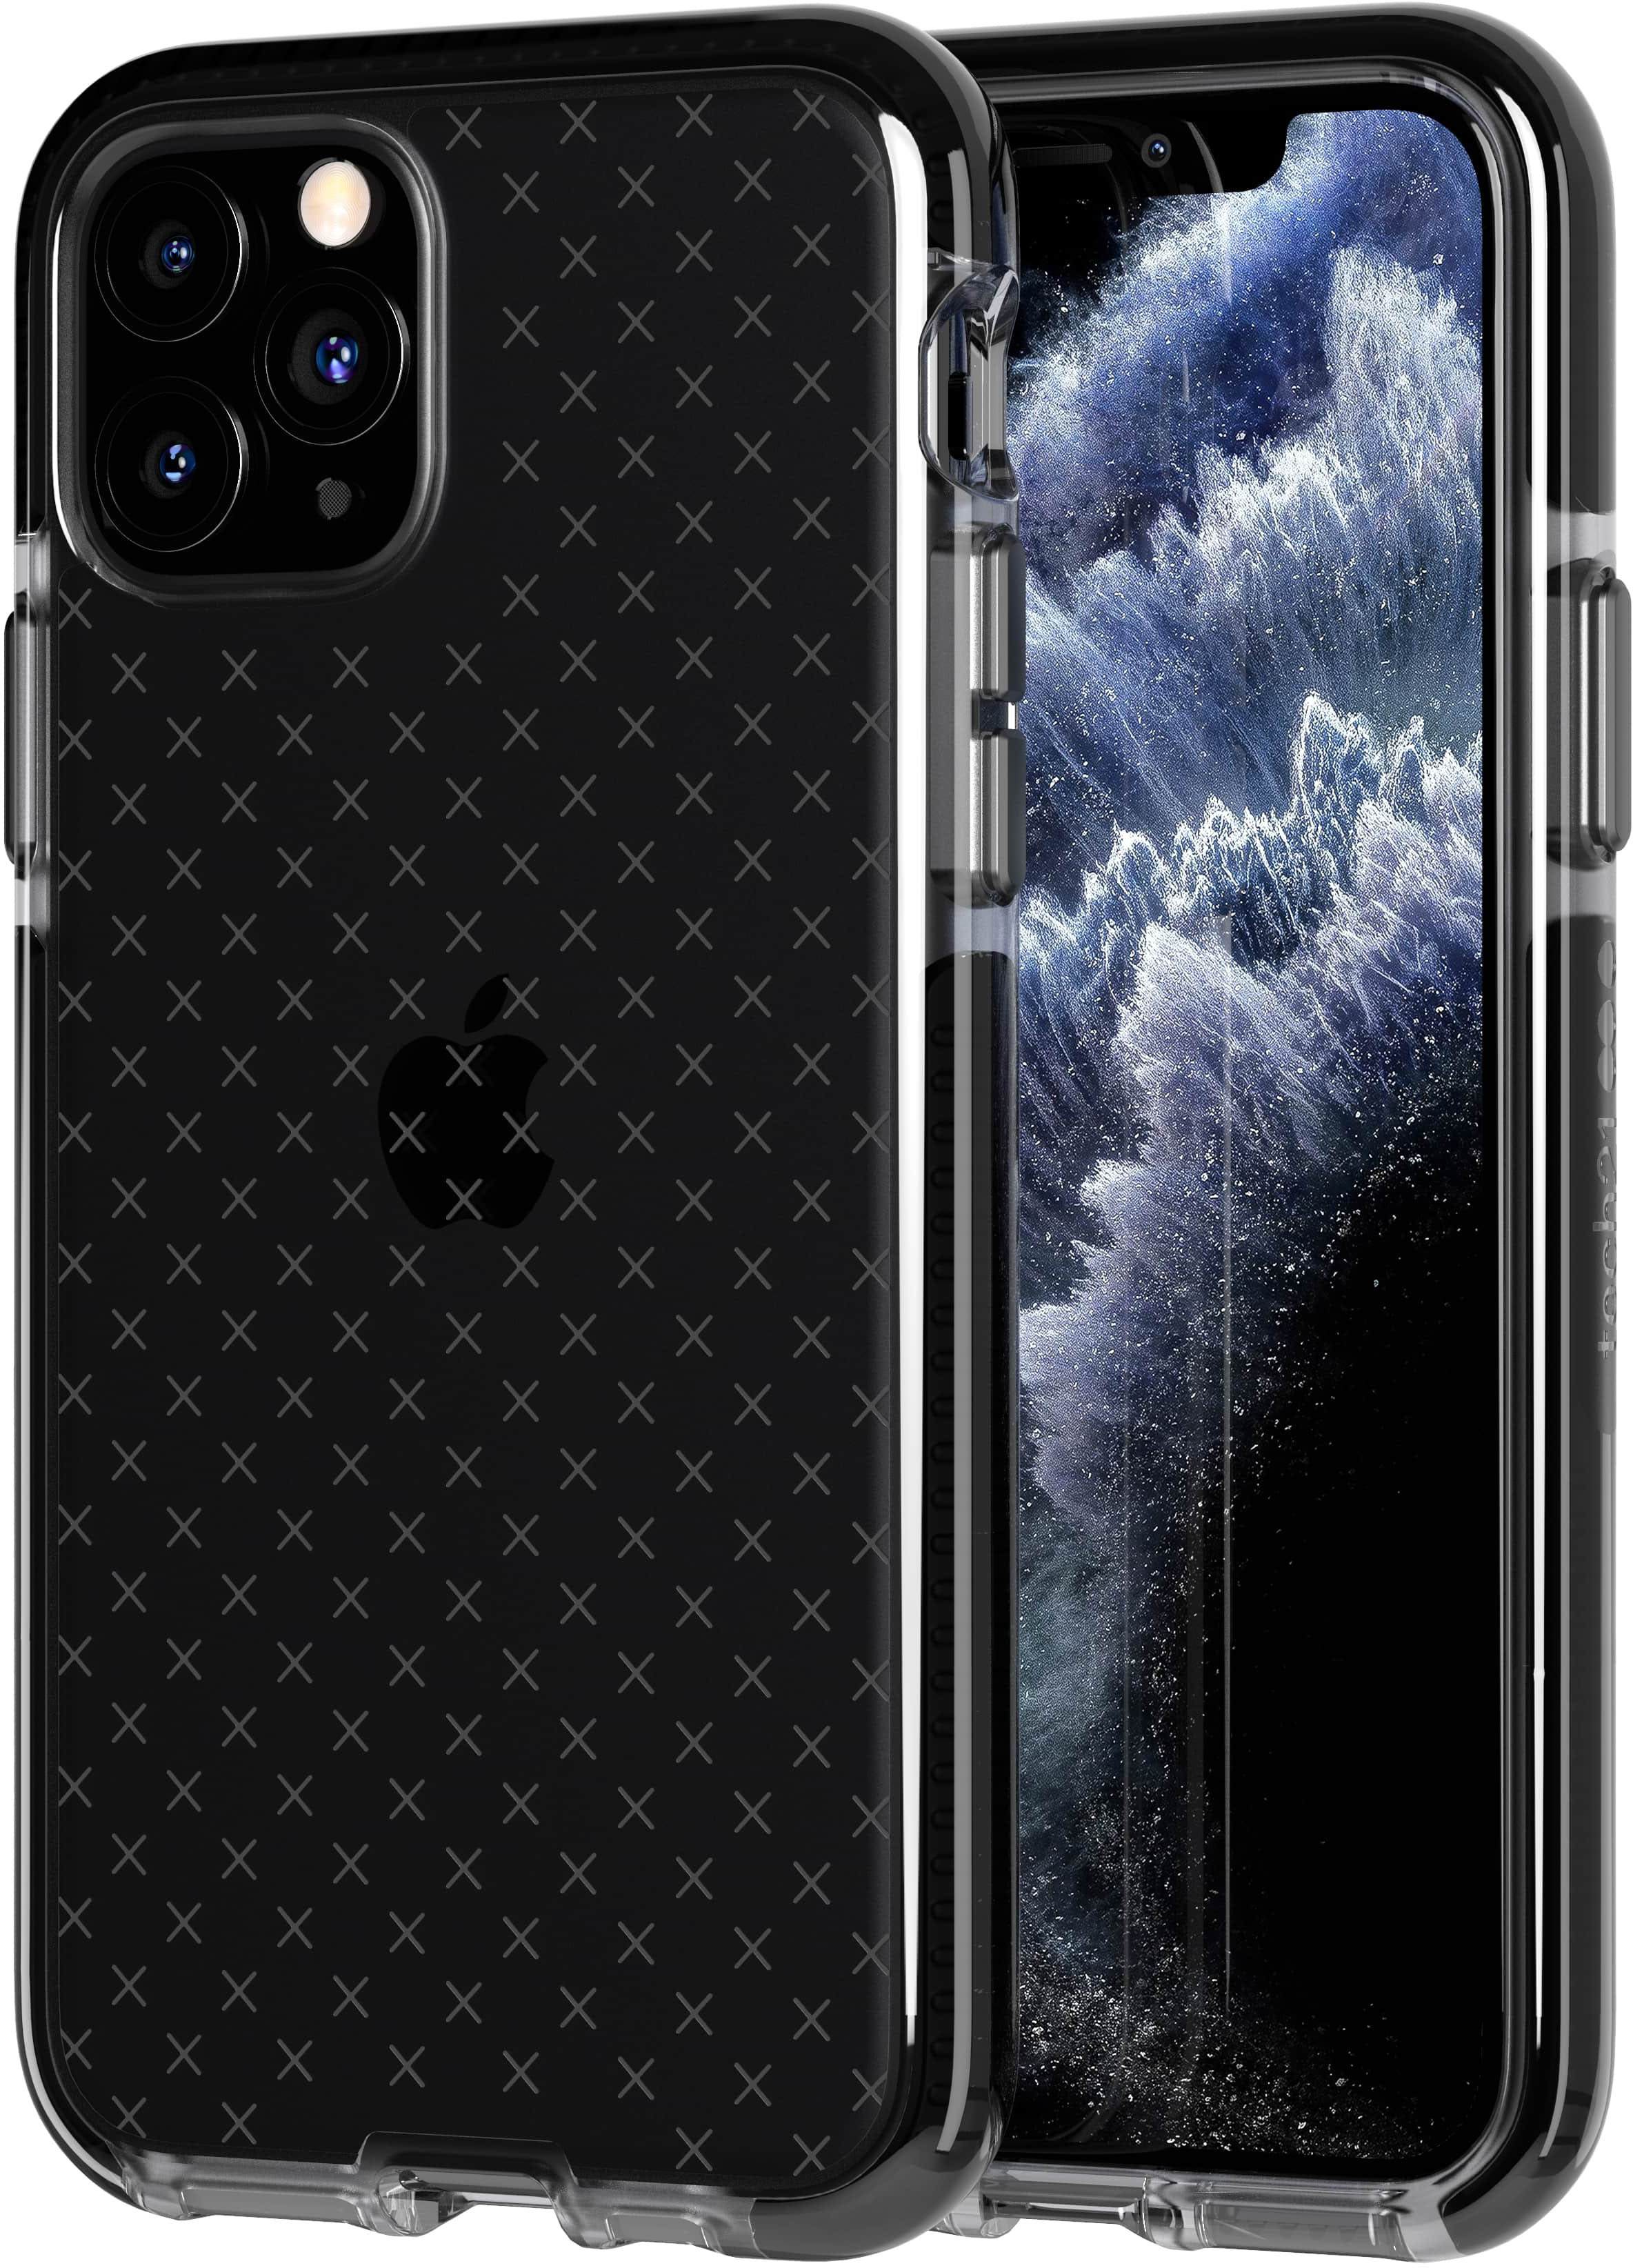 Tech21 - Evo Check Hard Shell Case for Apple iPhone 11 Pro / XR Pro - Black